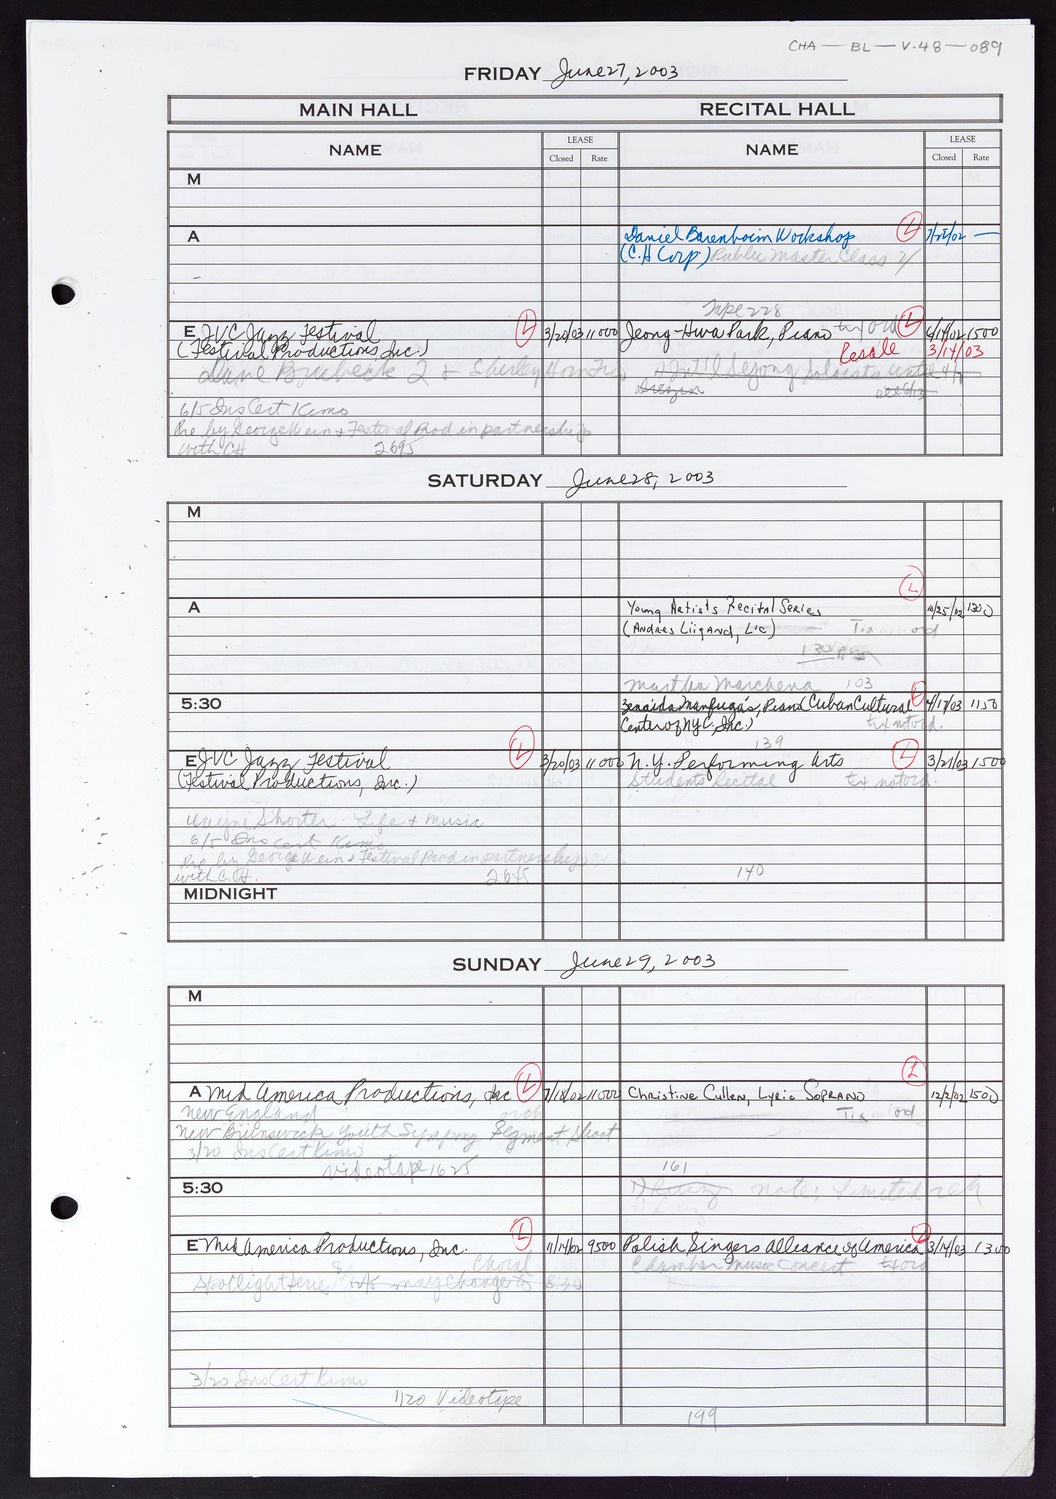 Carnegie Hall Booking Ledger, volume 48, page 89